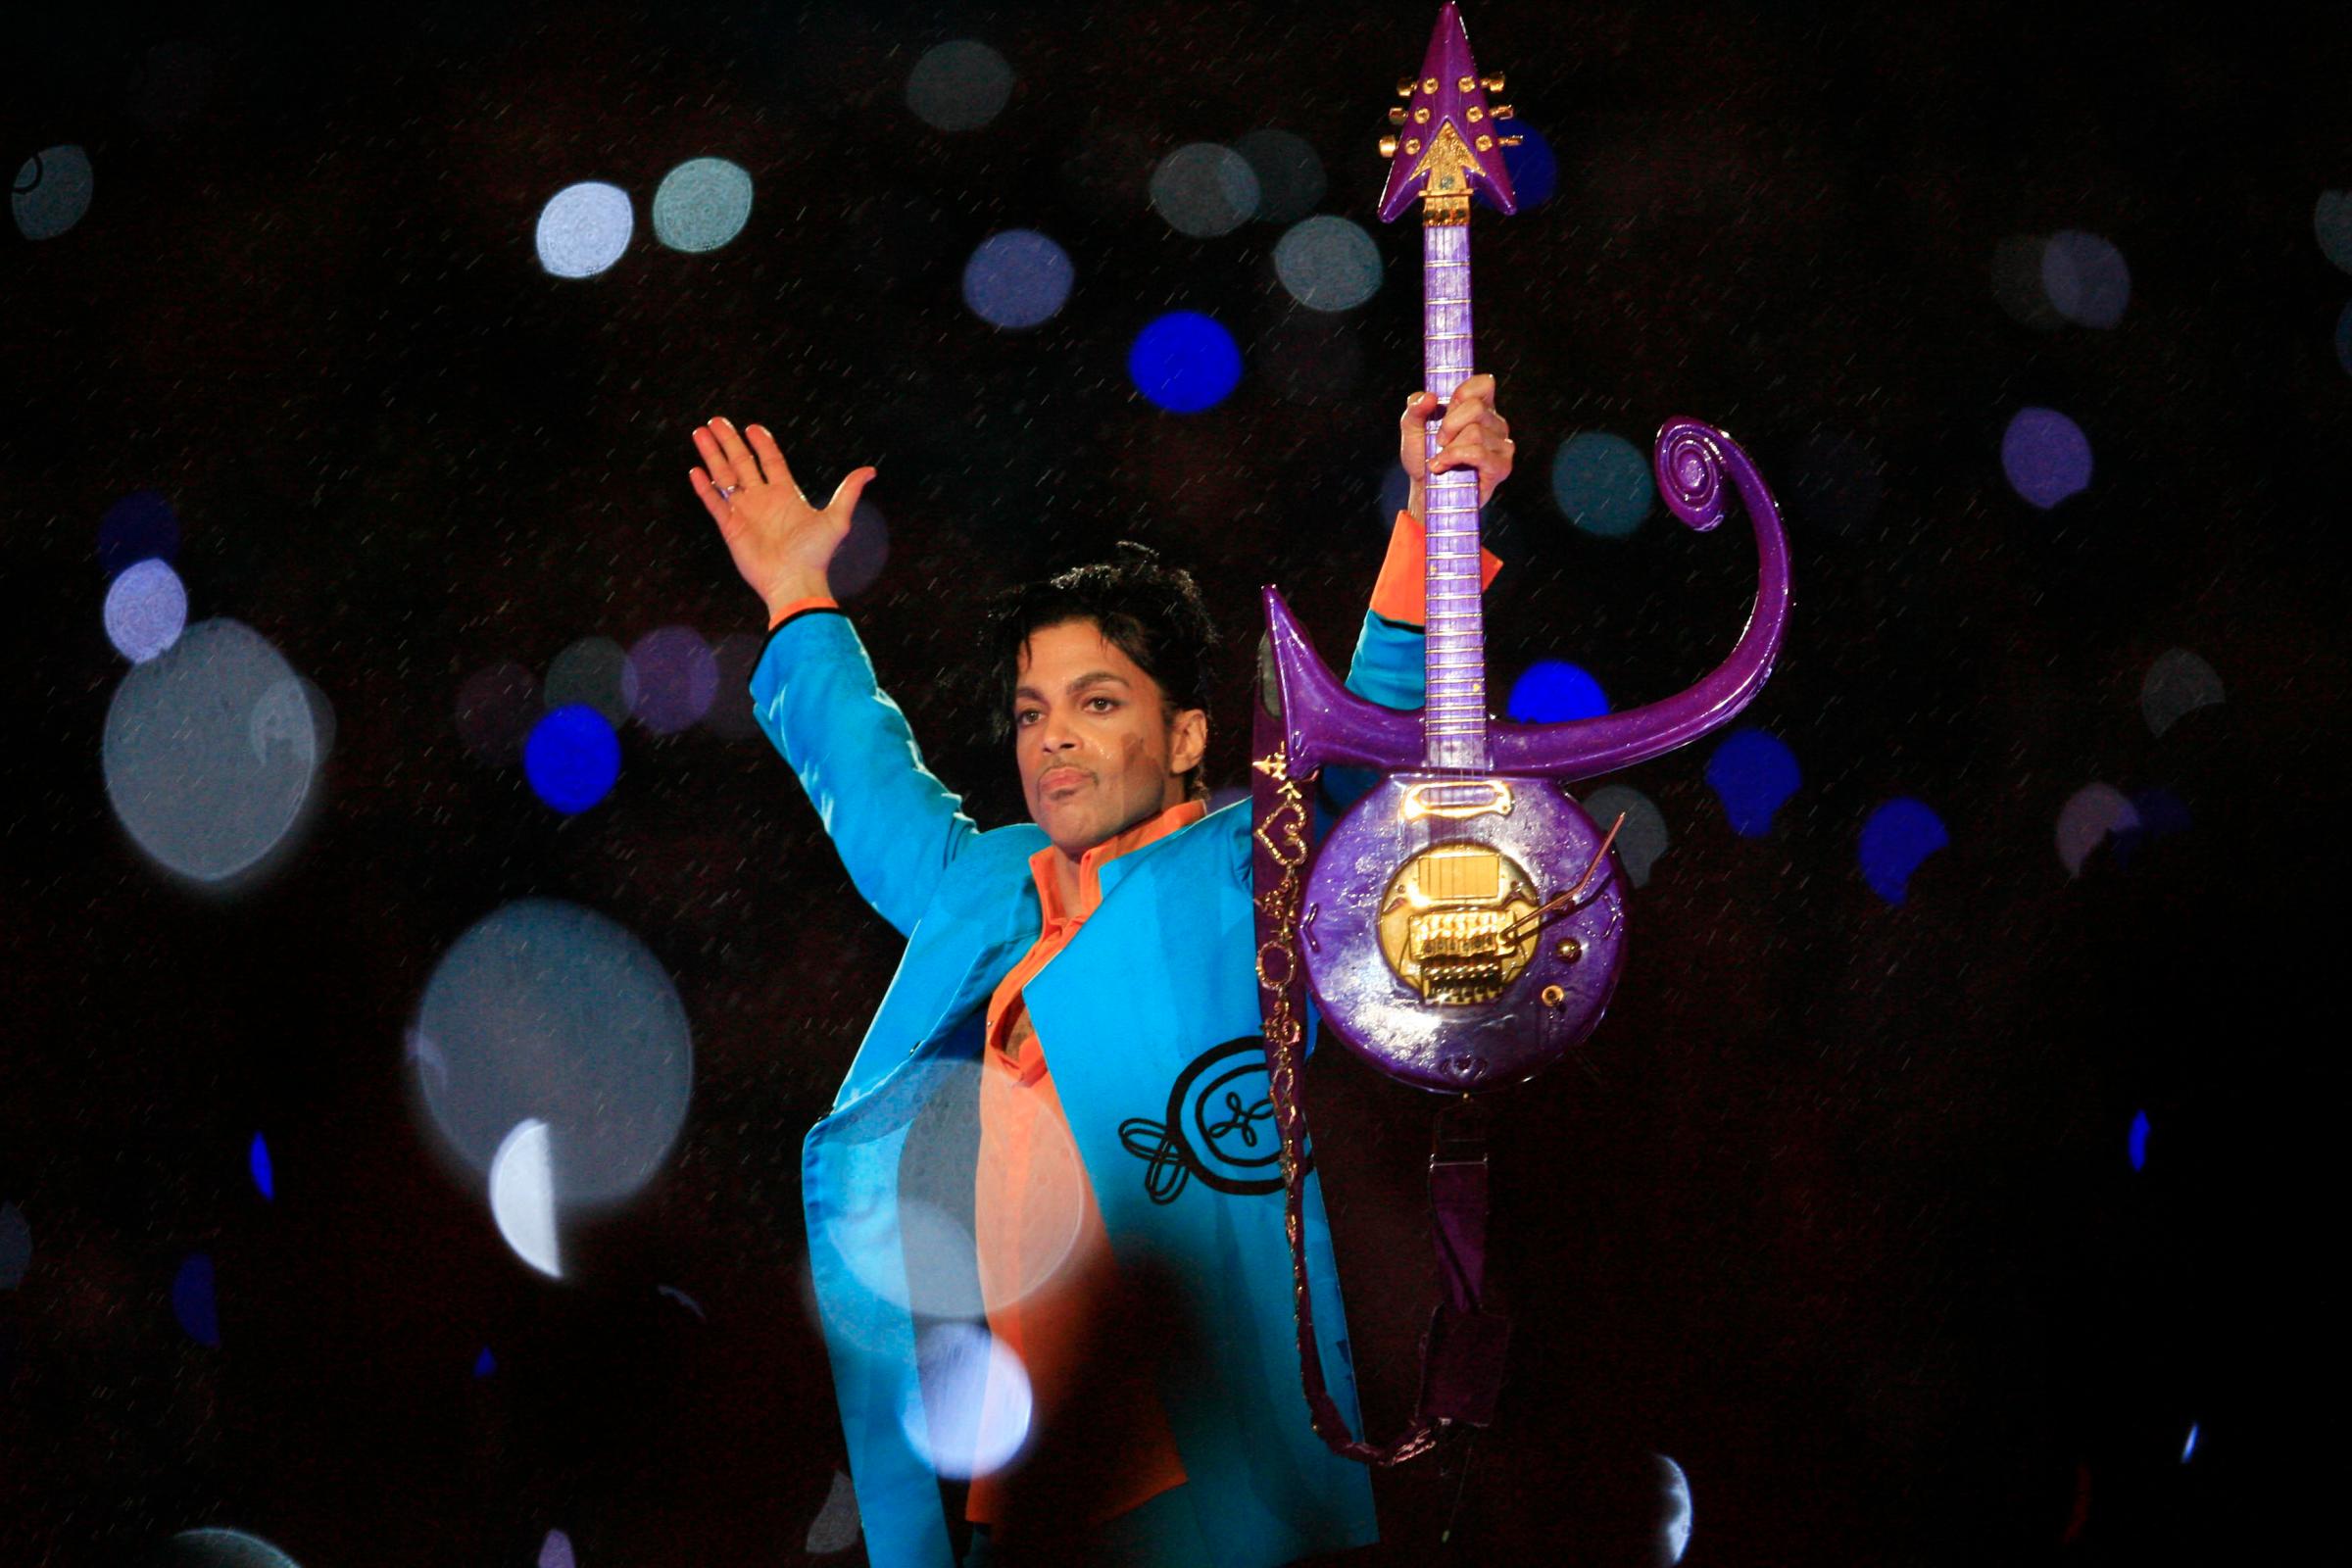 Prince performs during the 'Pepsi Halftime Show' at Super Bowl XLI between the Indianapolis Colts and the Chicago Bears on Feb. 4, 2007 at Dolphin Stadium in Miami Gardens, Fla.